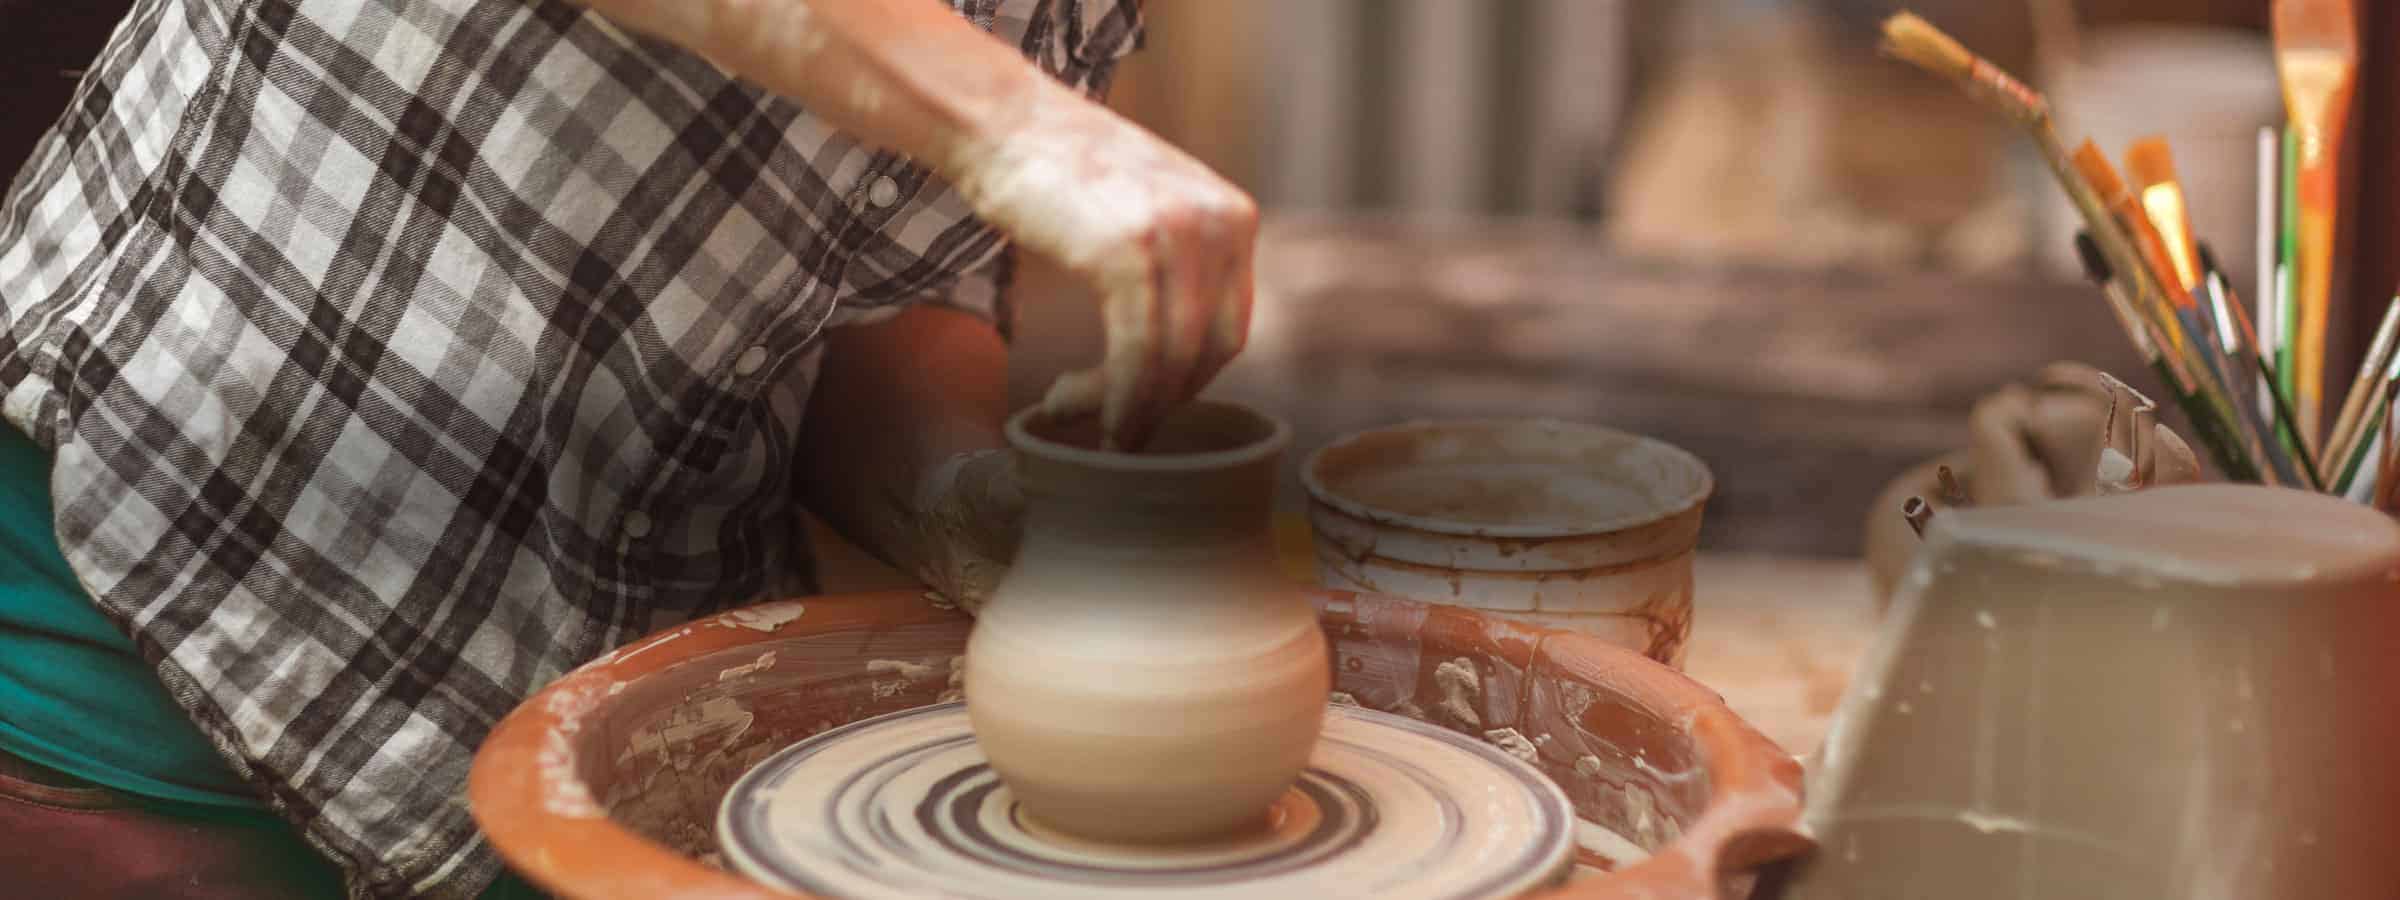 person making pottery